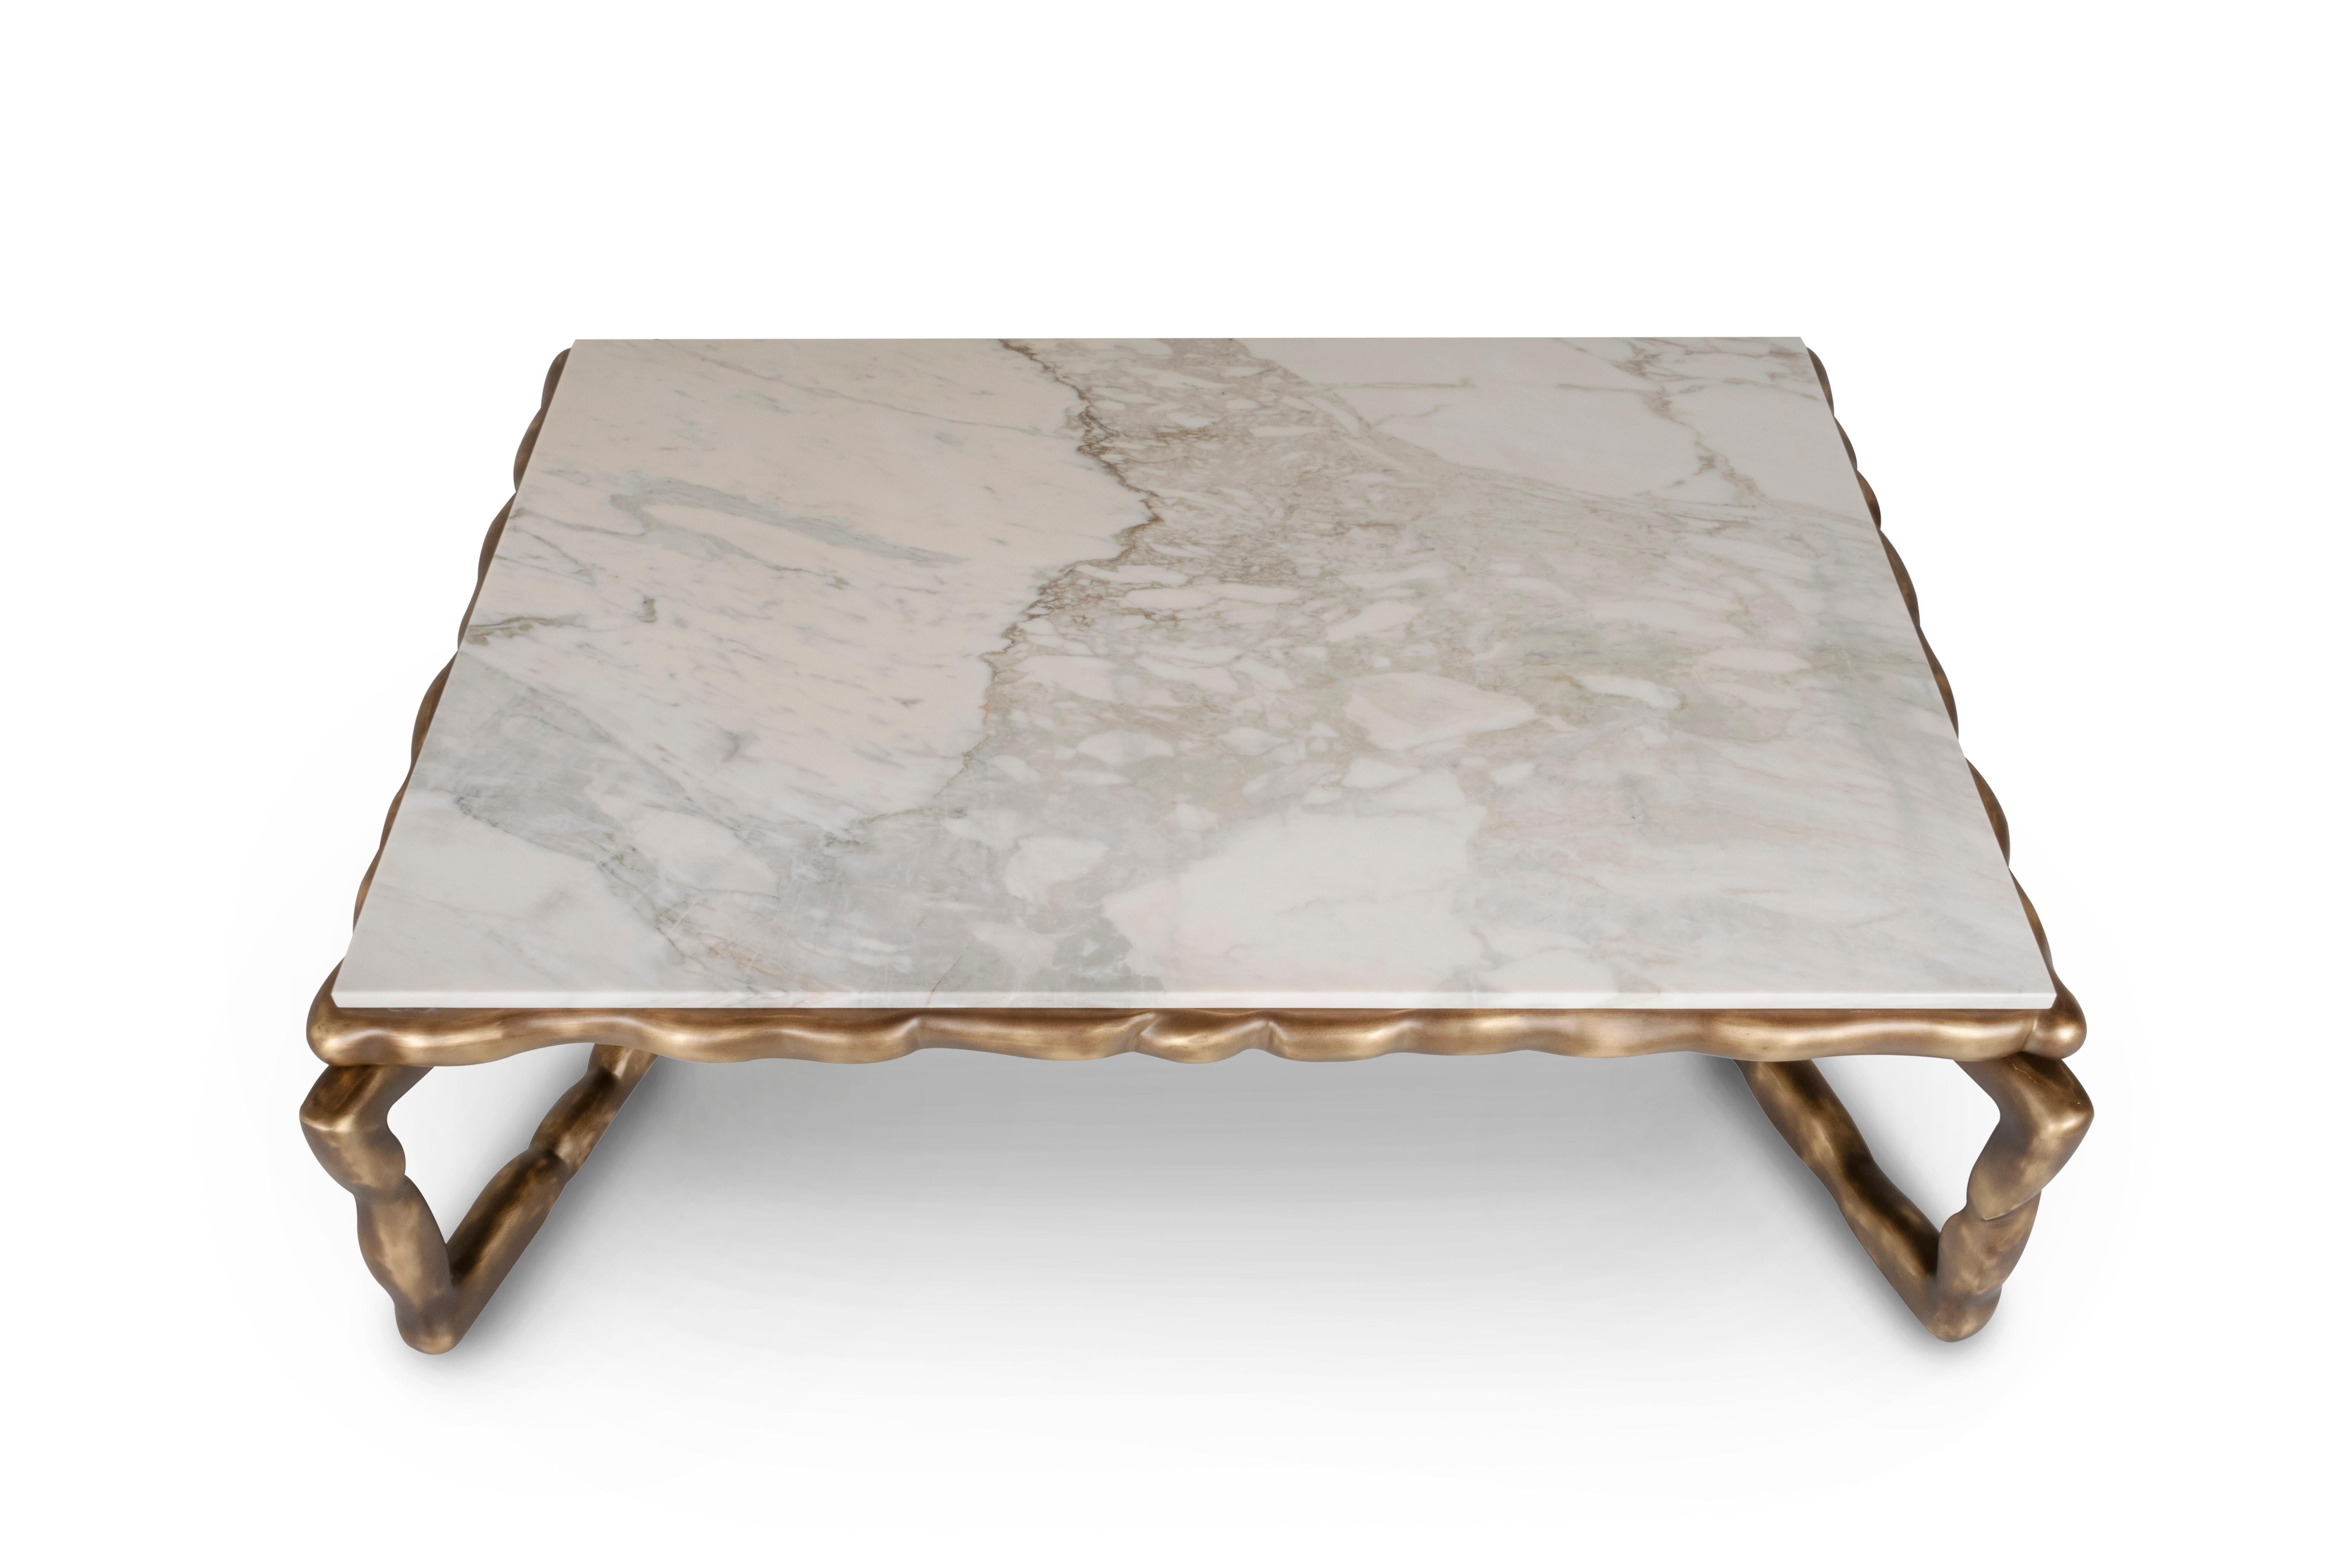 Contemporary Art Deco Stone Coffee Table Calacatta Marble Handmade in Portugal by Greenapple For Sale